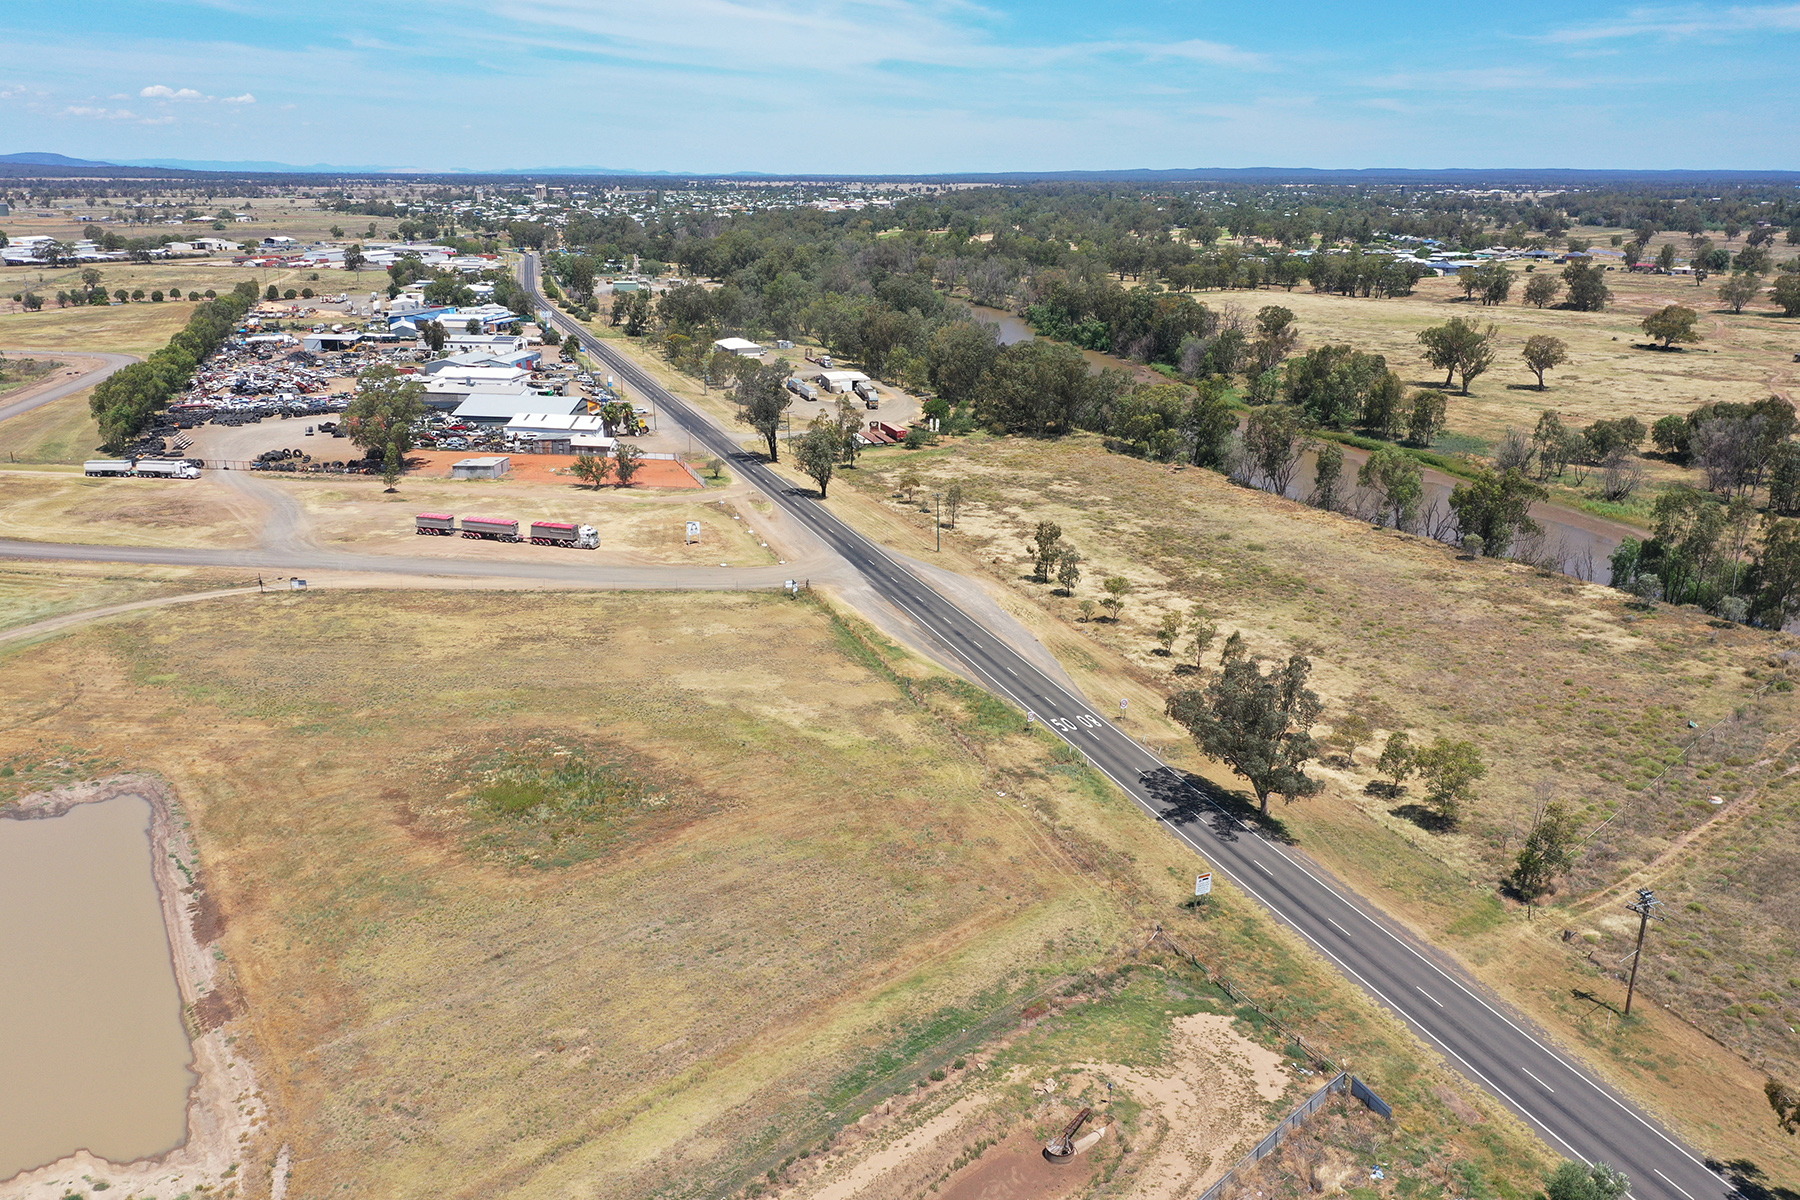 View looking South East over the Kamilaroi Highway, Narrabri